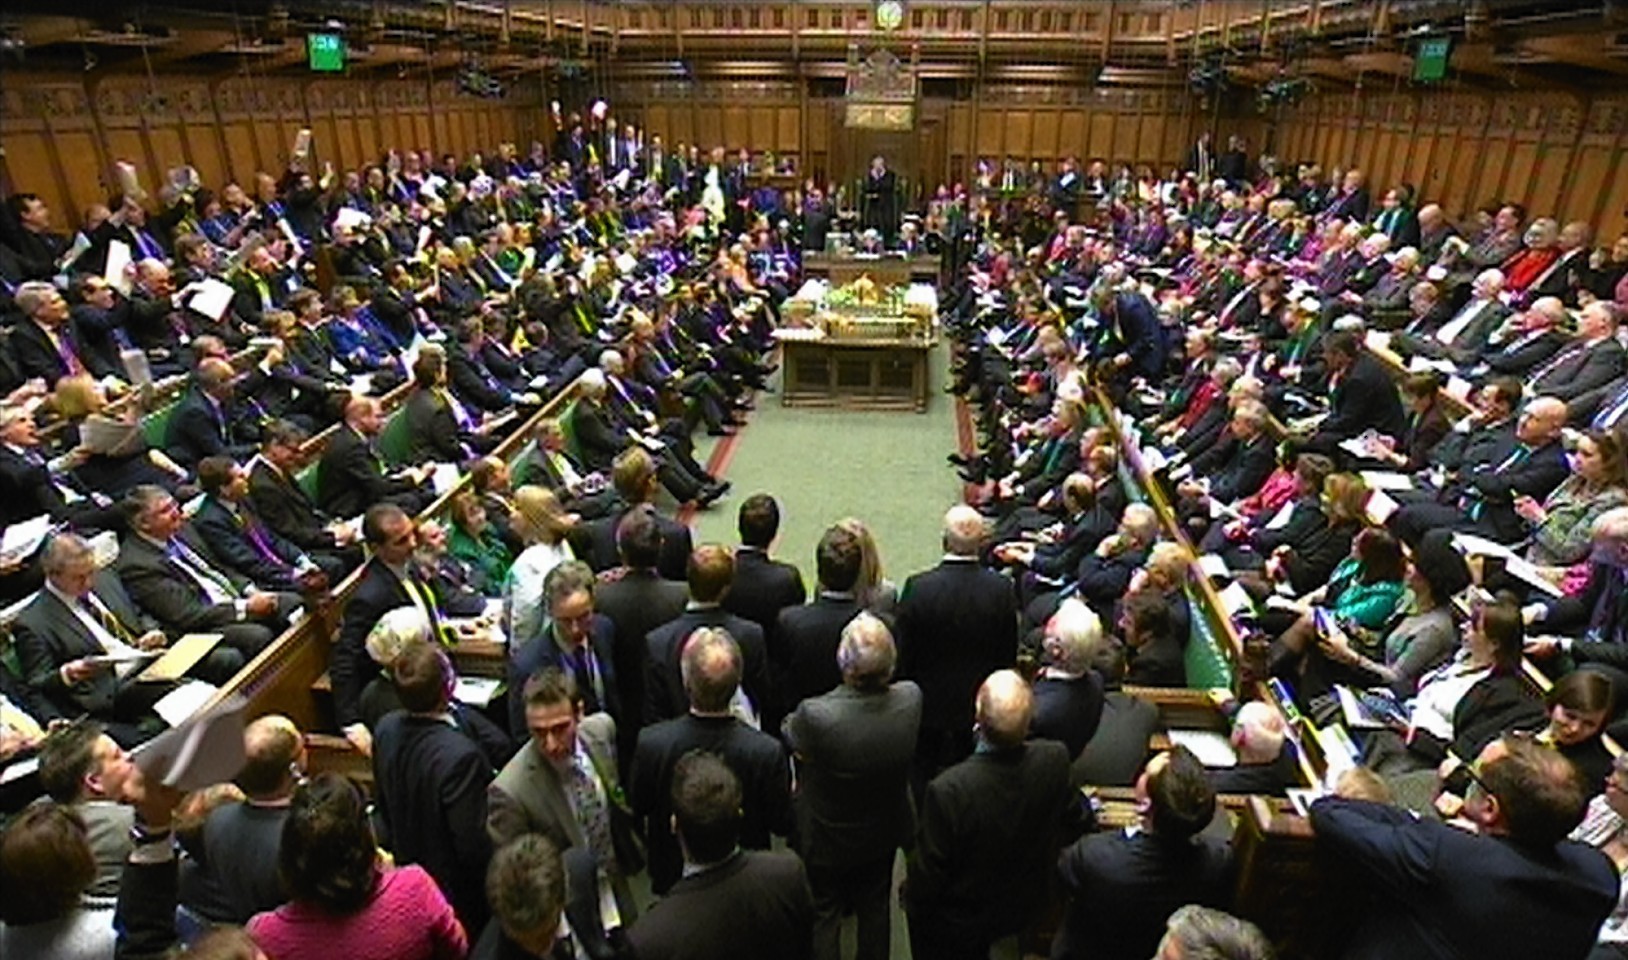 Protesters tried to enter the House of Commons